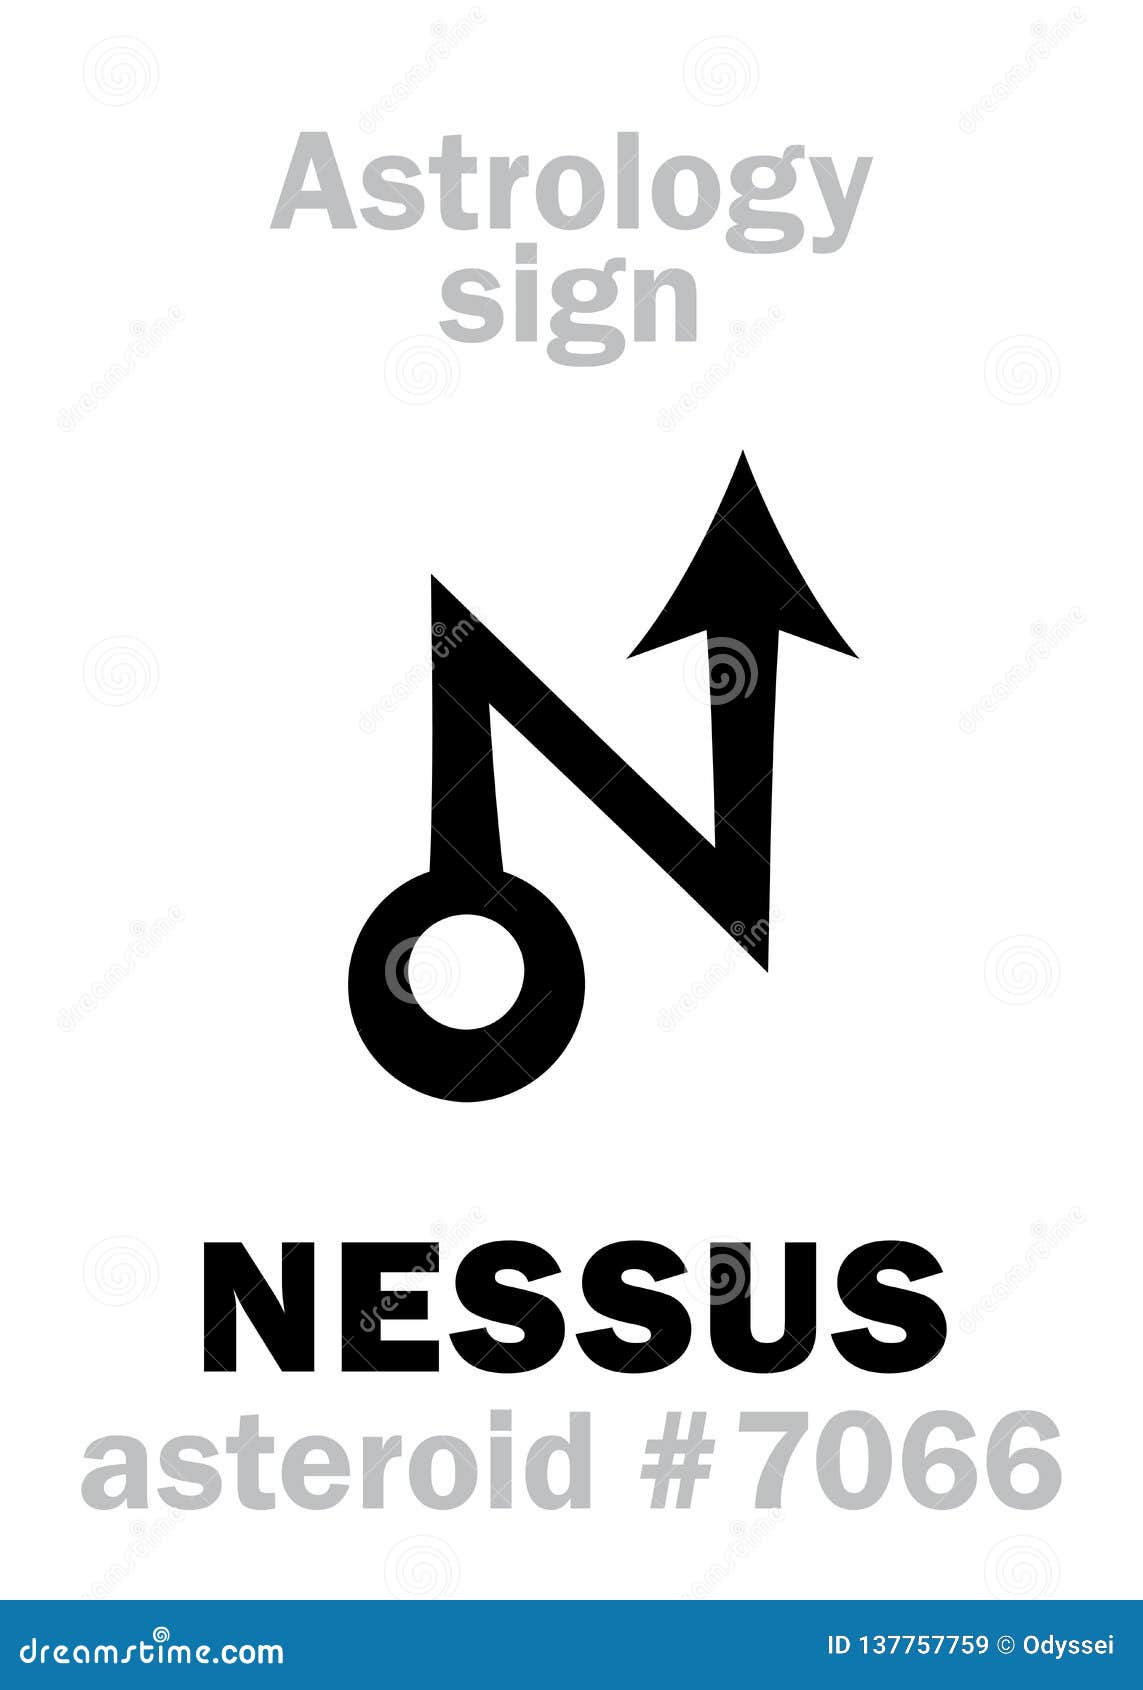 astrology: asteroid nessus